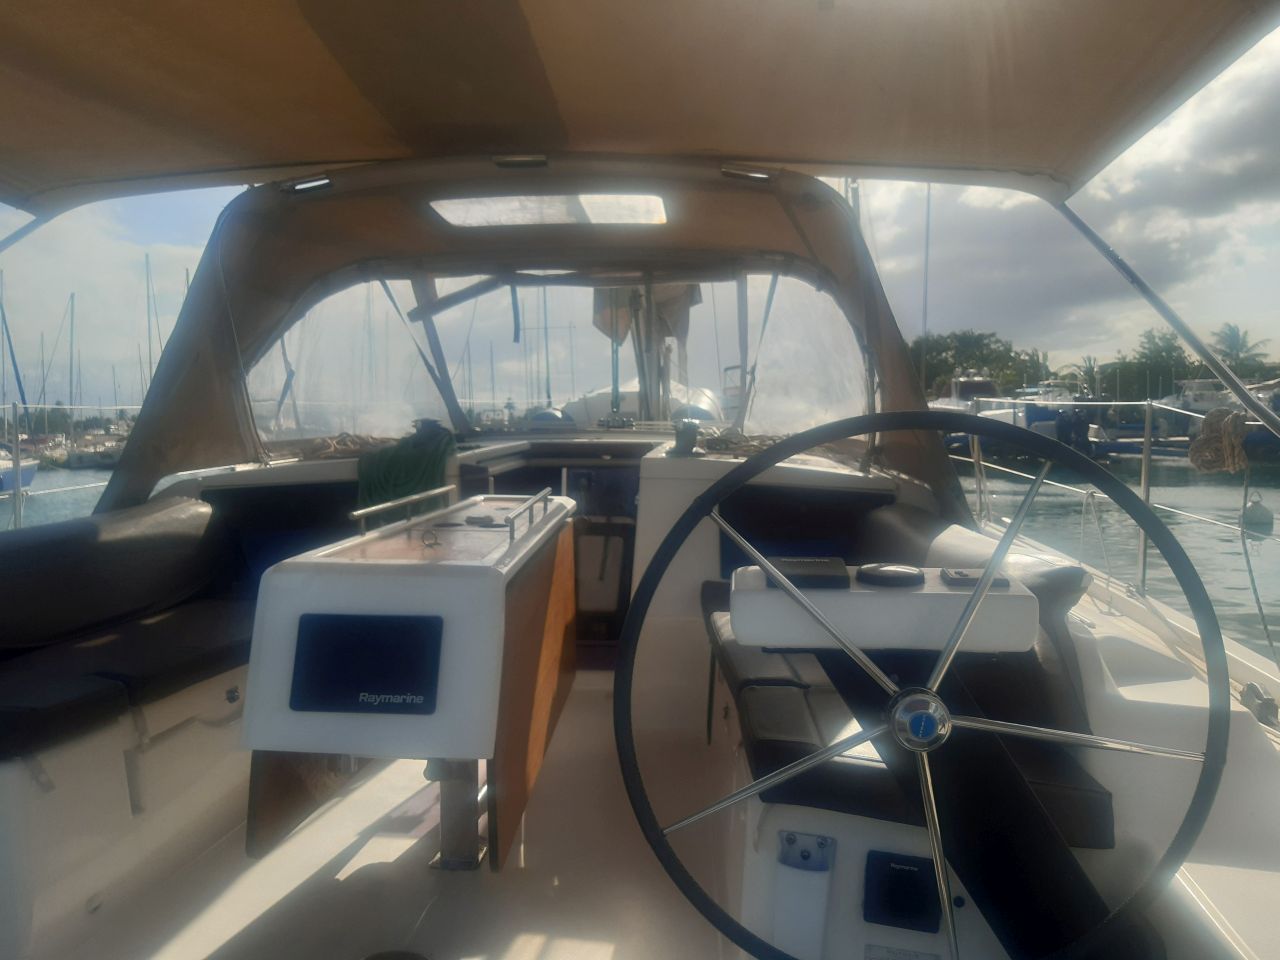 Dufour 390 GL - Yacht Charter Toulon & Boat hire in France French Riviera Toulon Saint-Mandrier-sur-Mer Port Pin Rolland 3